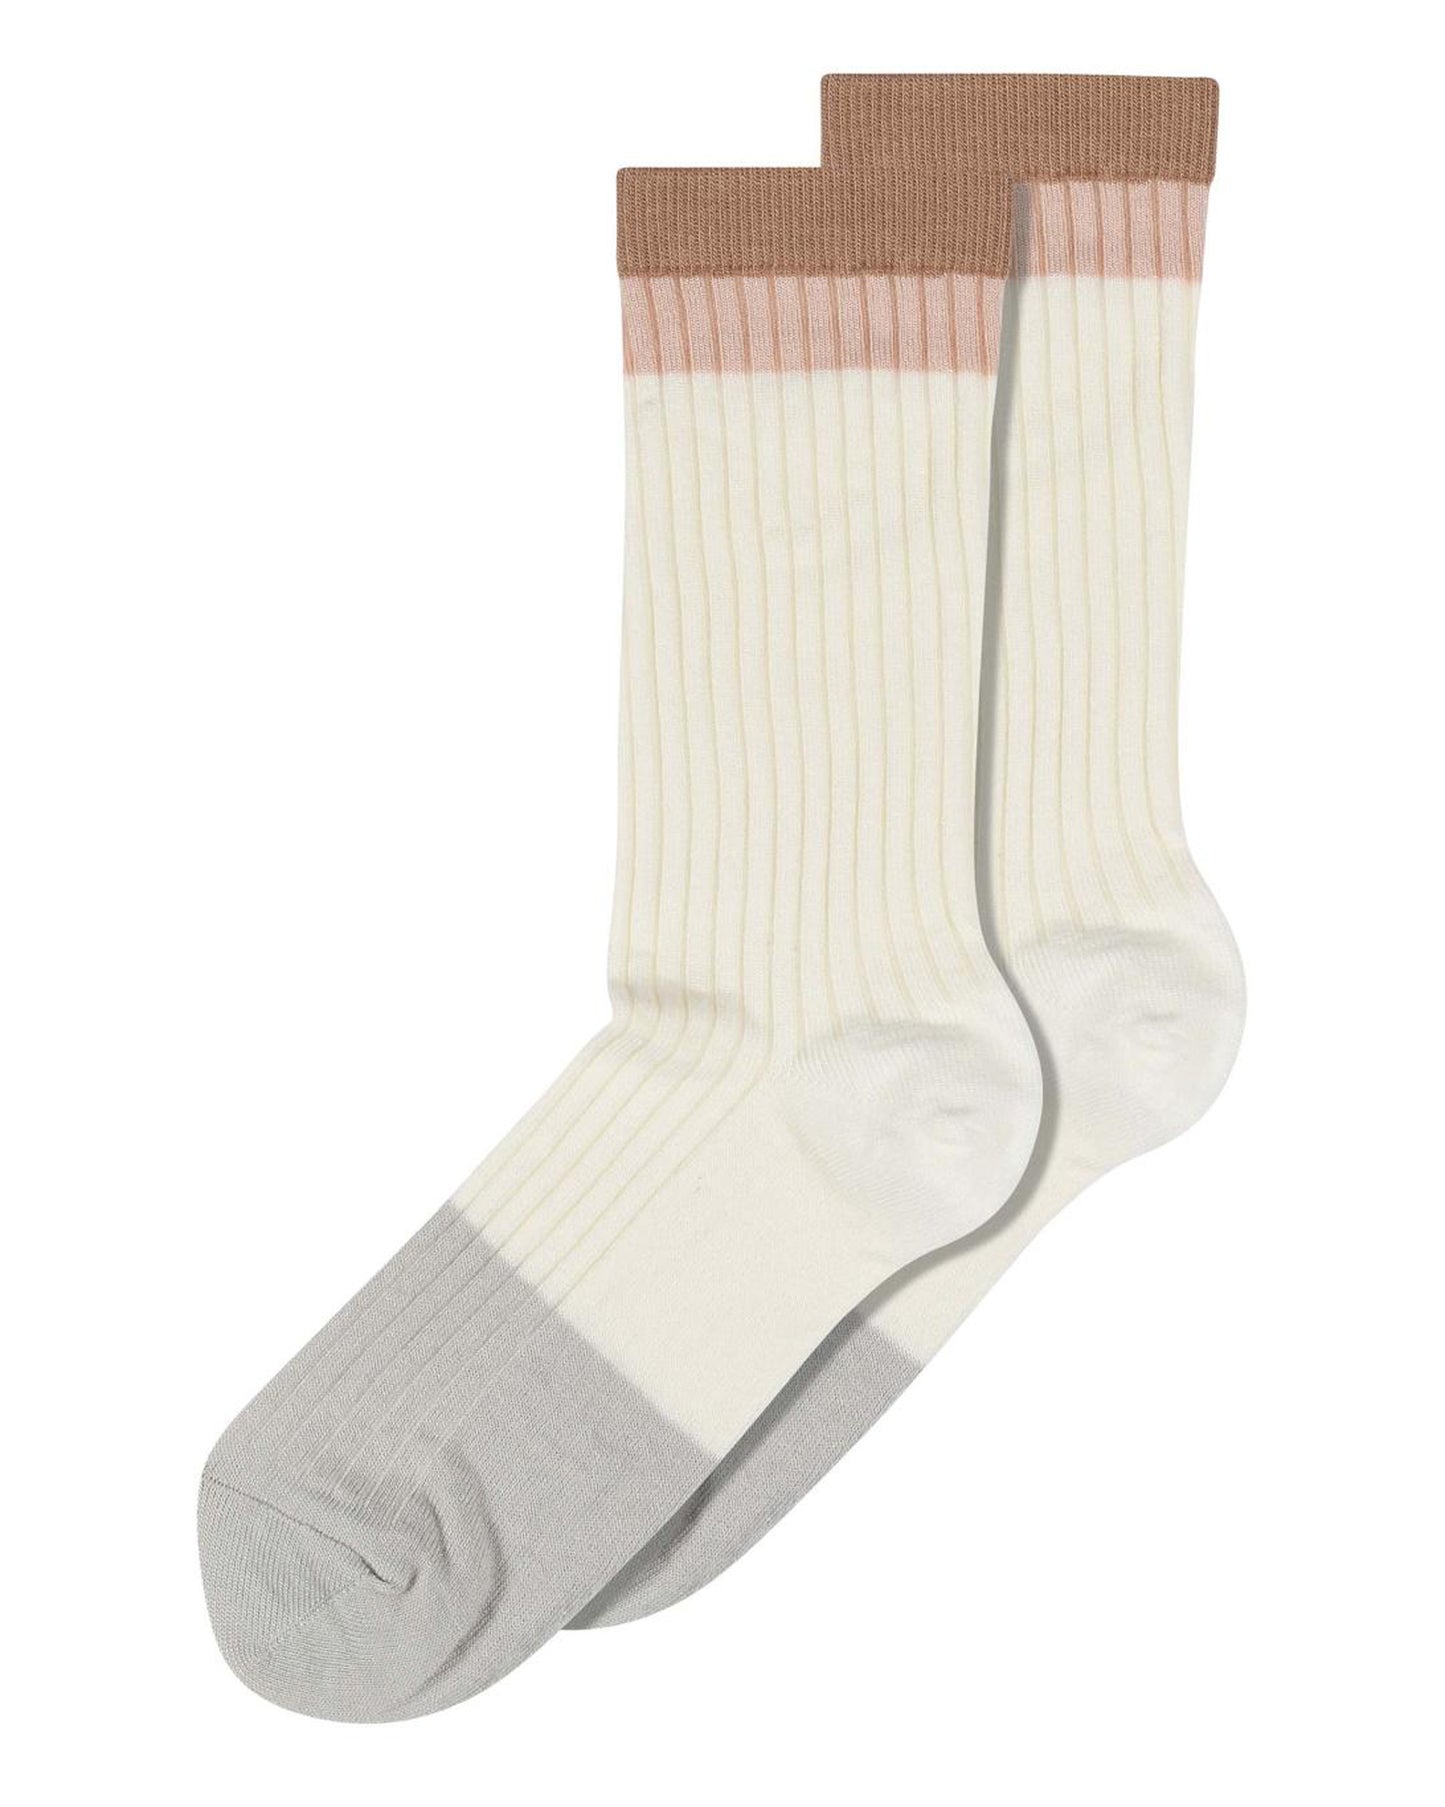 MP Denmark 79704 Paula Socks - Cream / ivory ribbed crew length bamboo socks with a tan beige and pale pink stripe cuff and light grey toe.